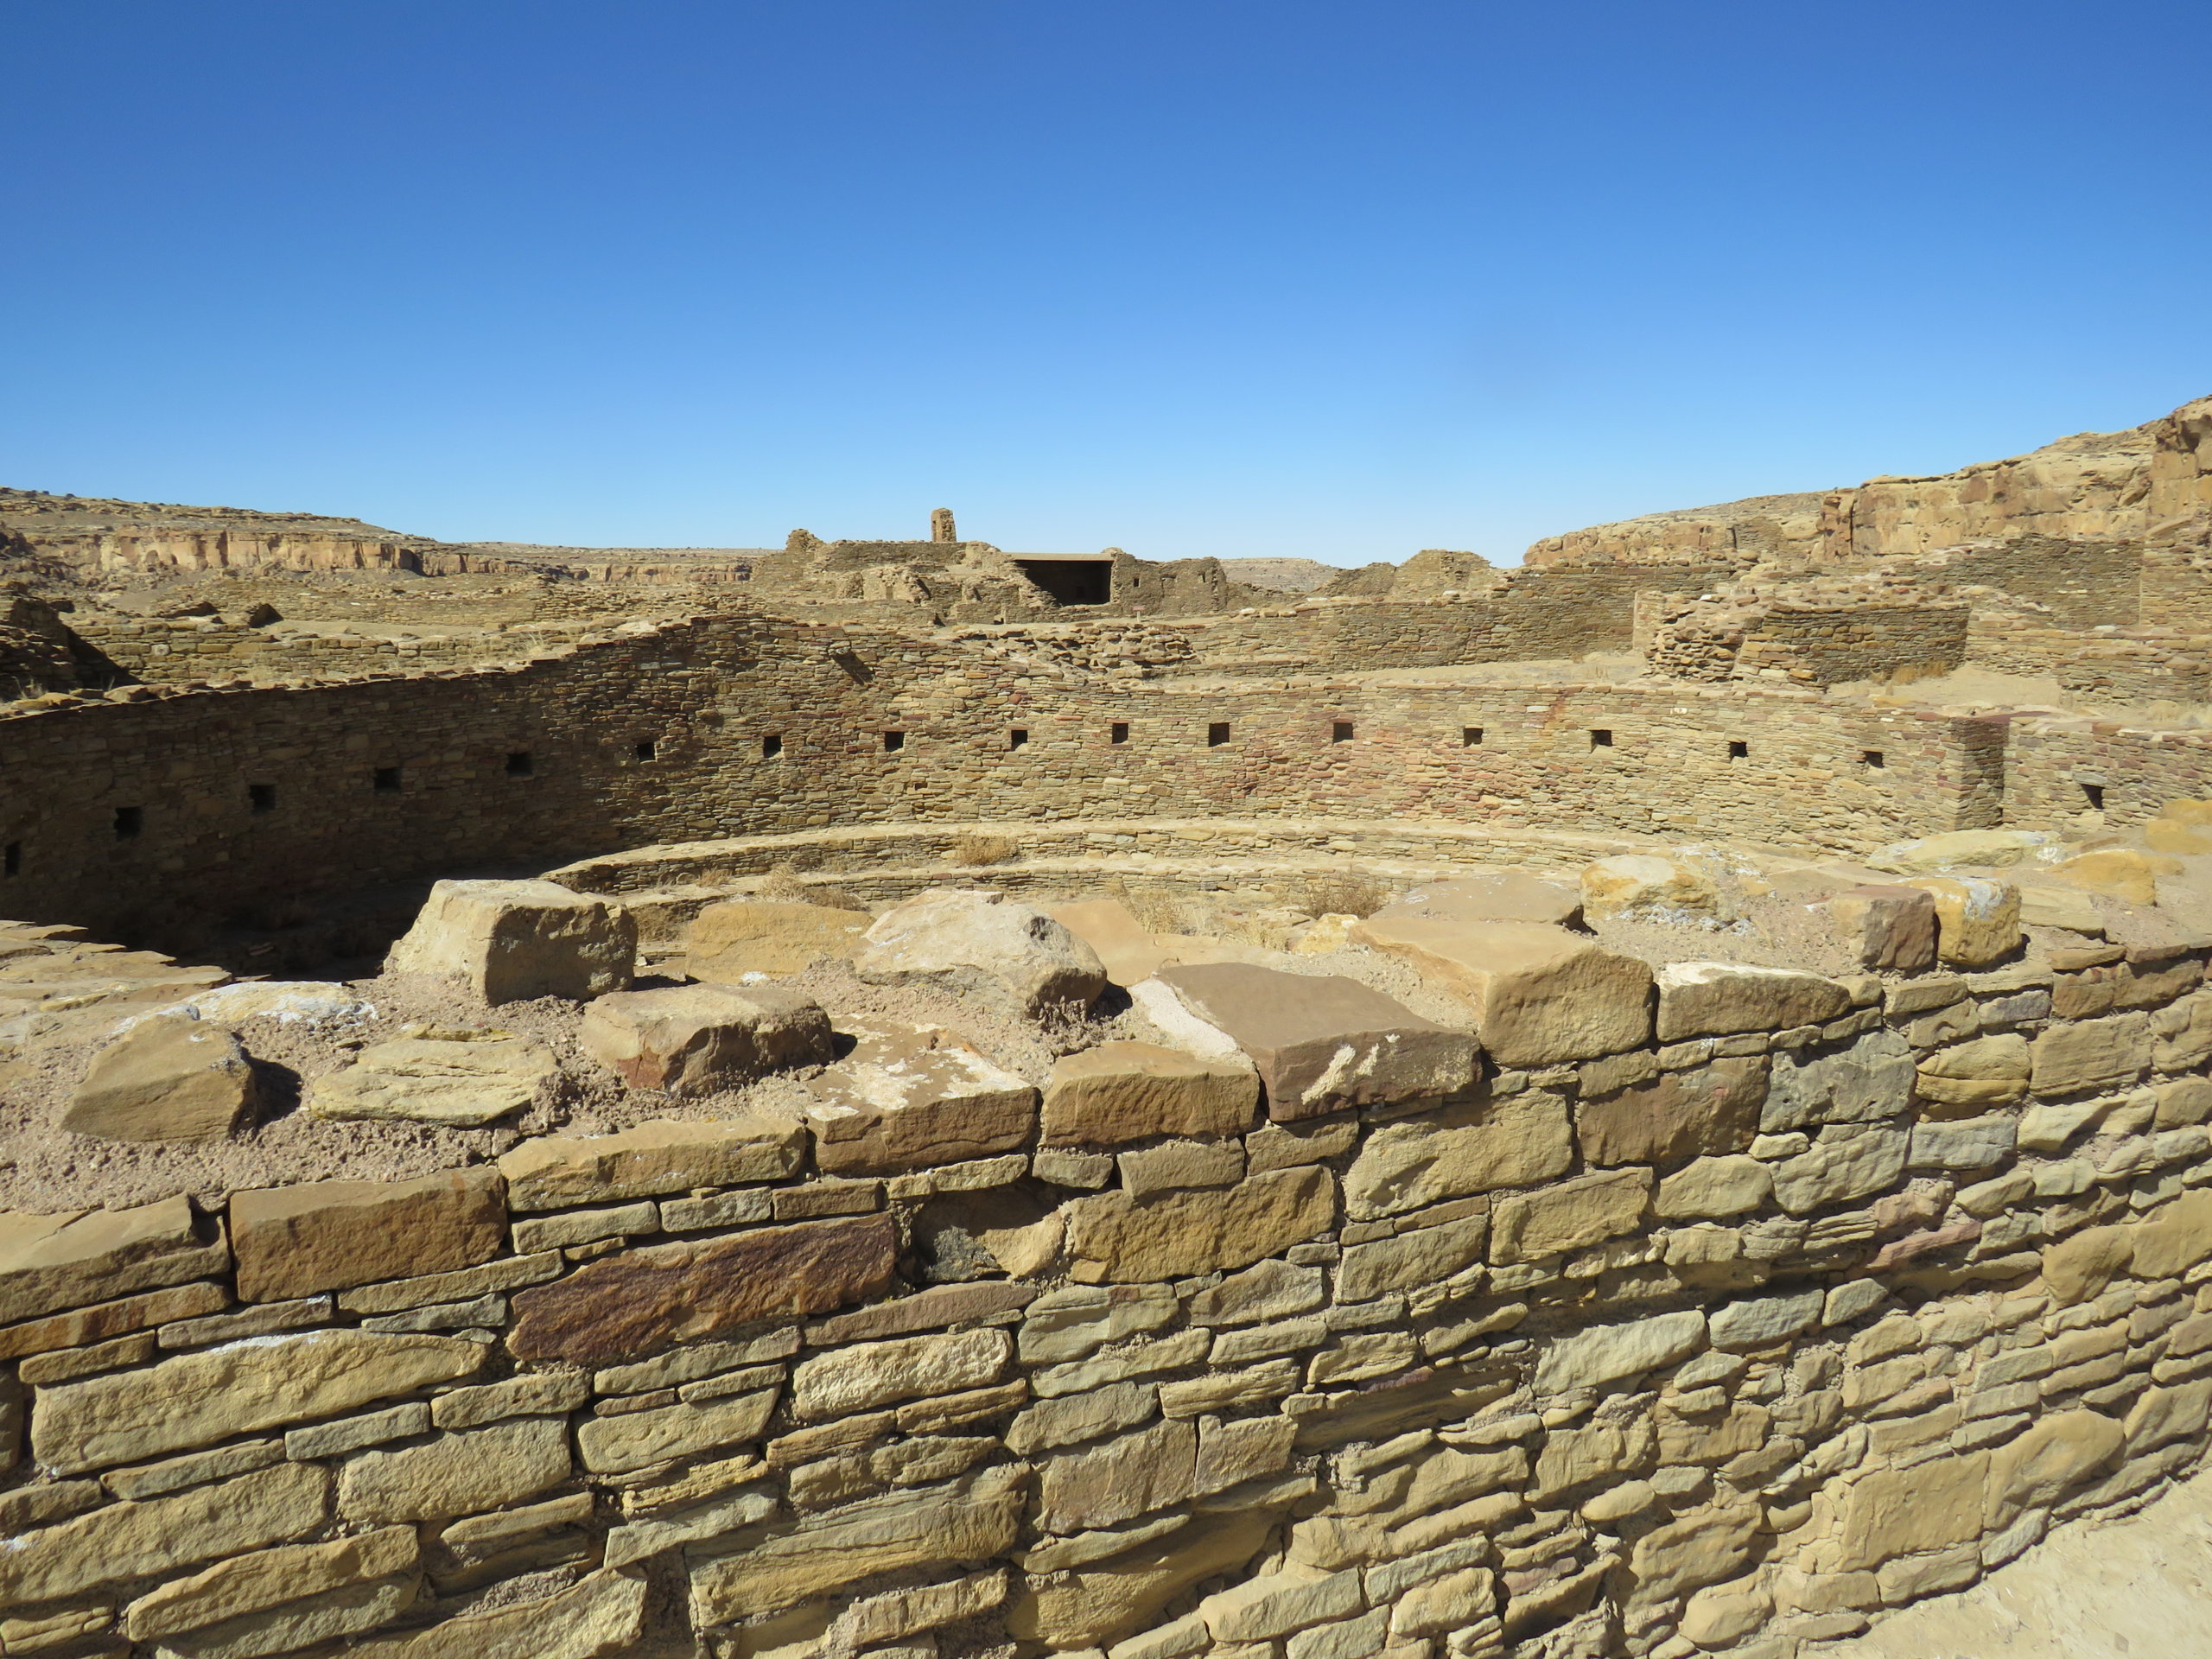 Federal legislation aims to permanently withdraw lands around Chaco from mineral leasing